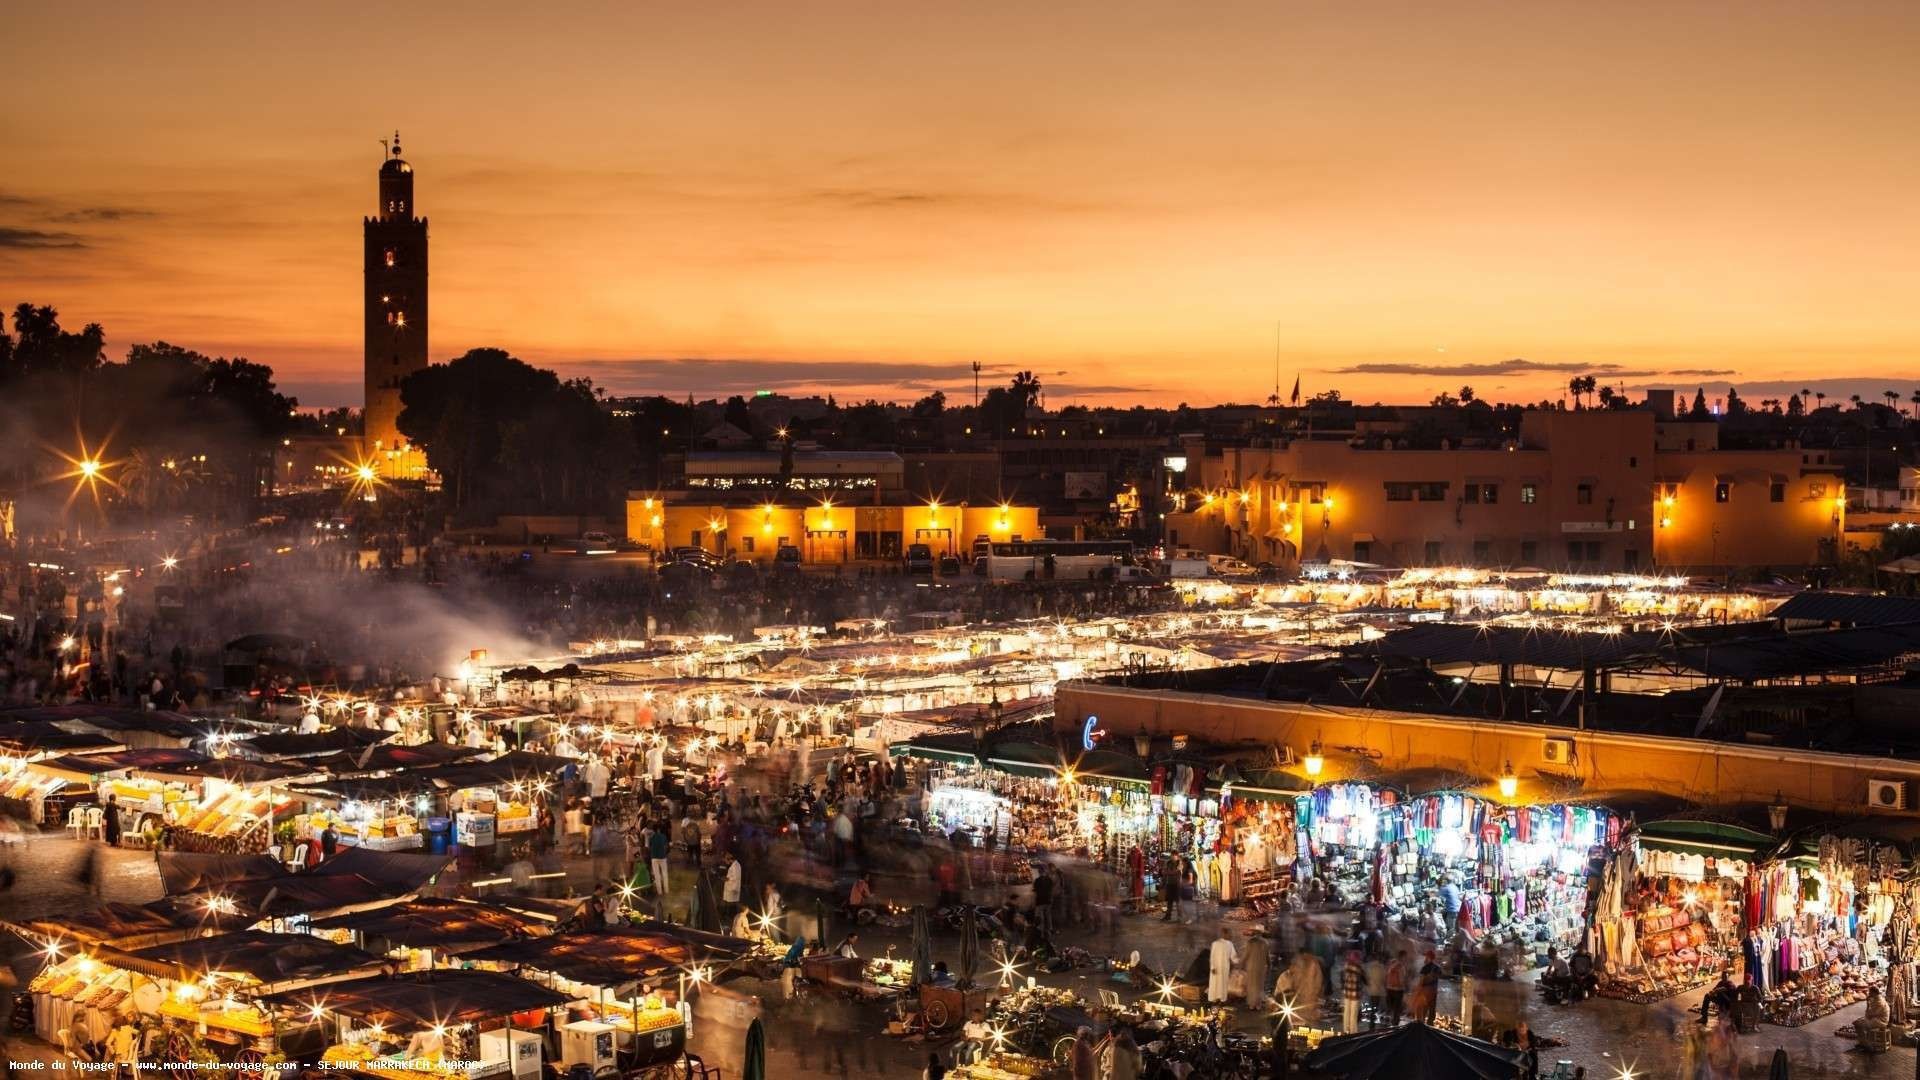 Marrakesh charm, Exotic markets, Traditional architecture, Cultural heritage, 1920x1080 Full HD Desktop